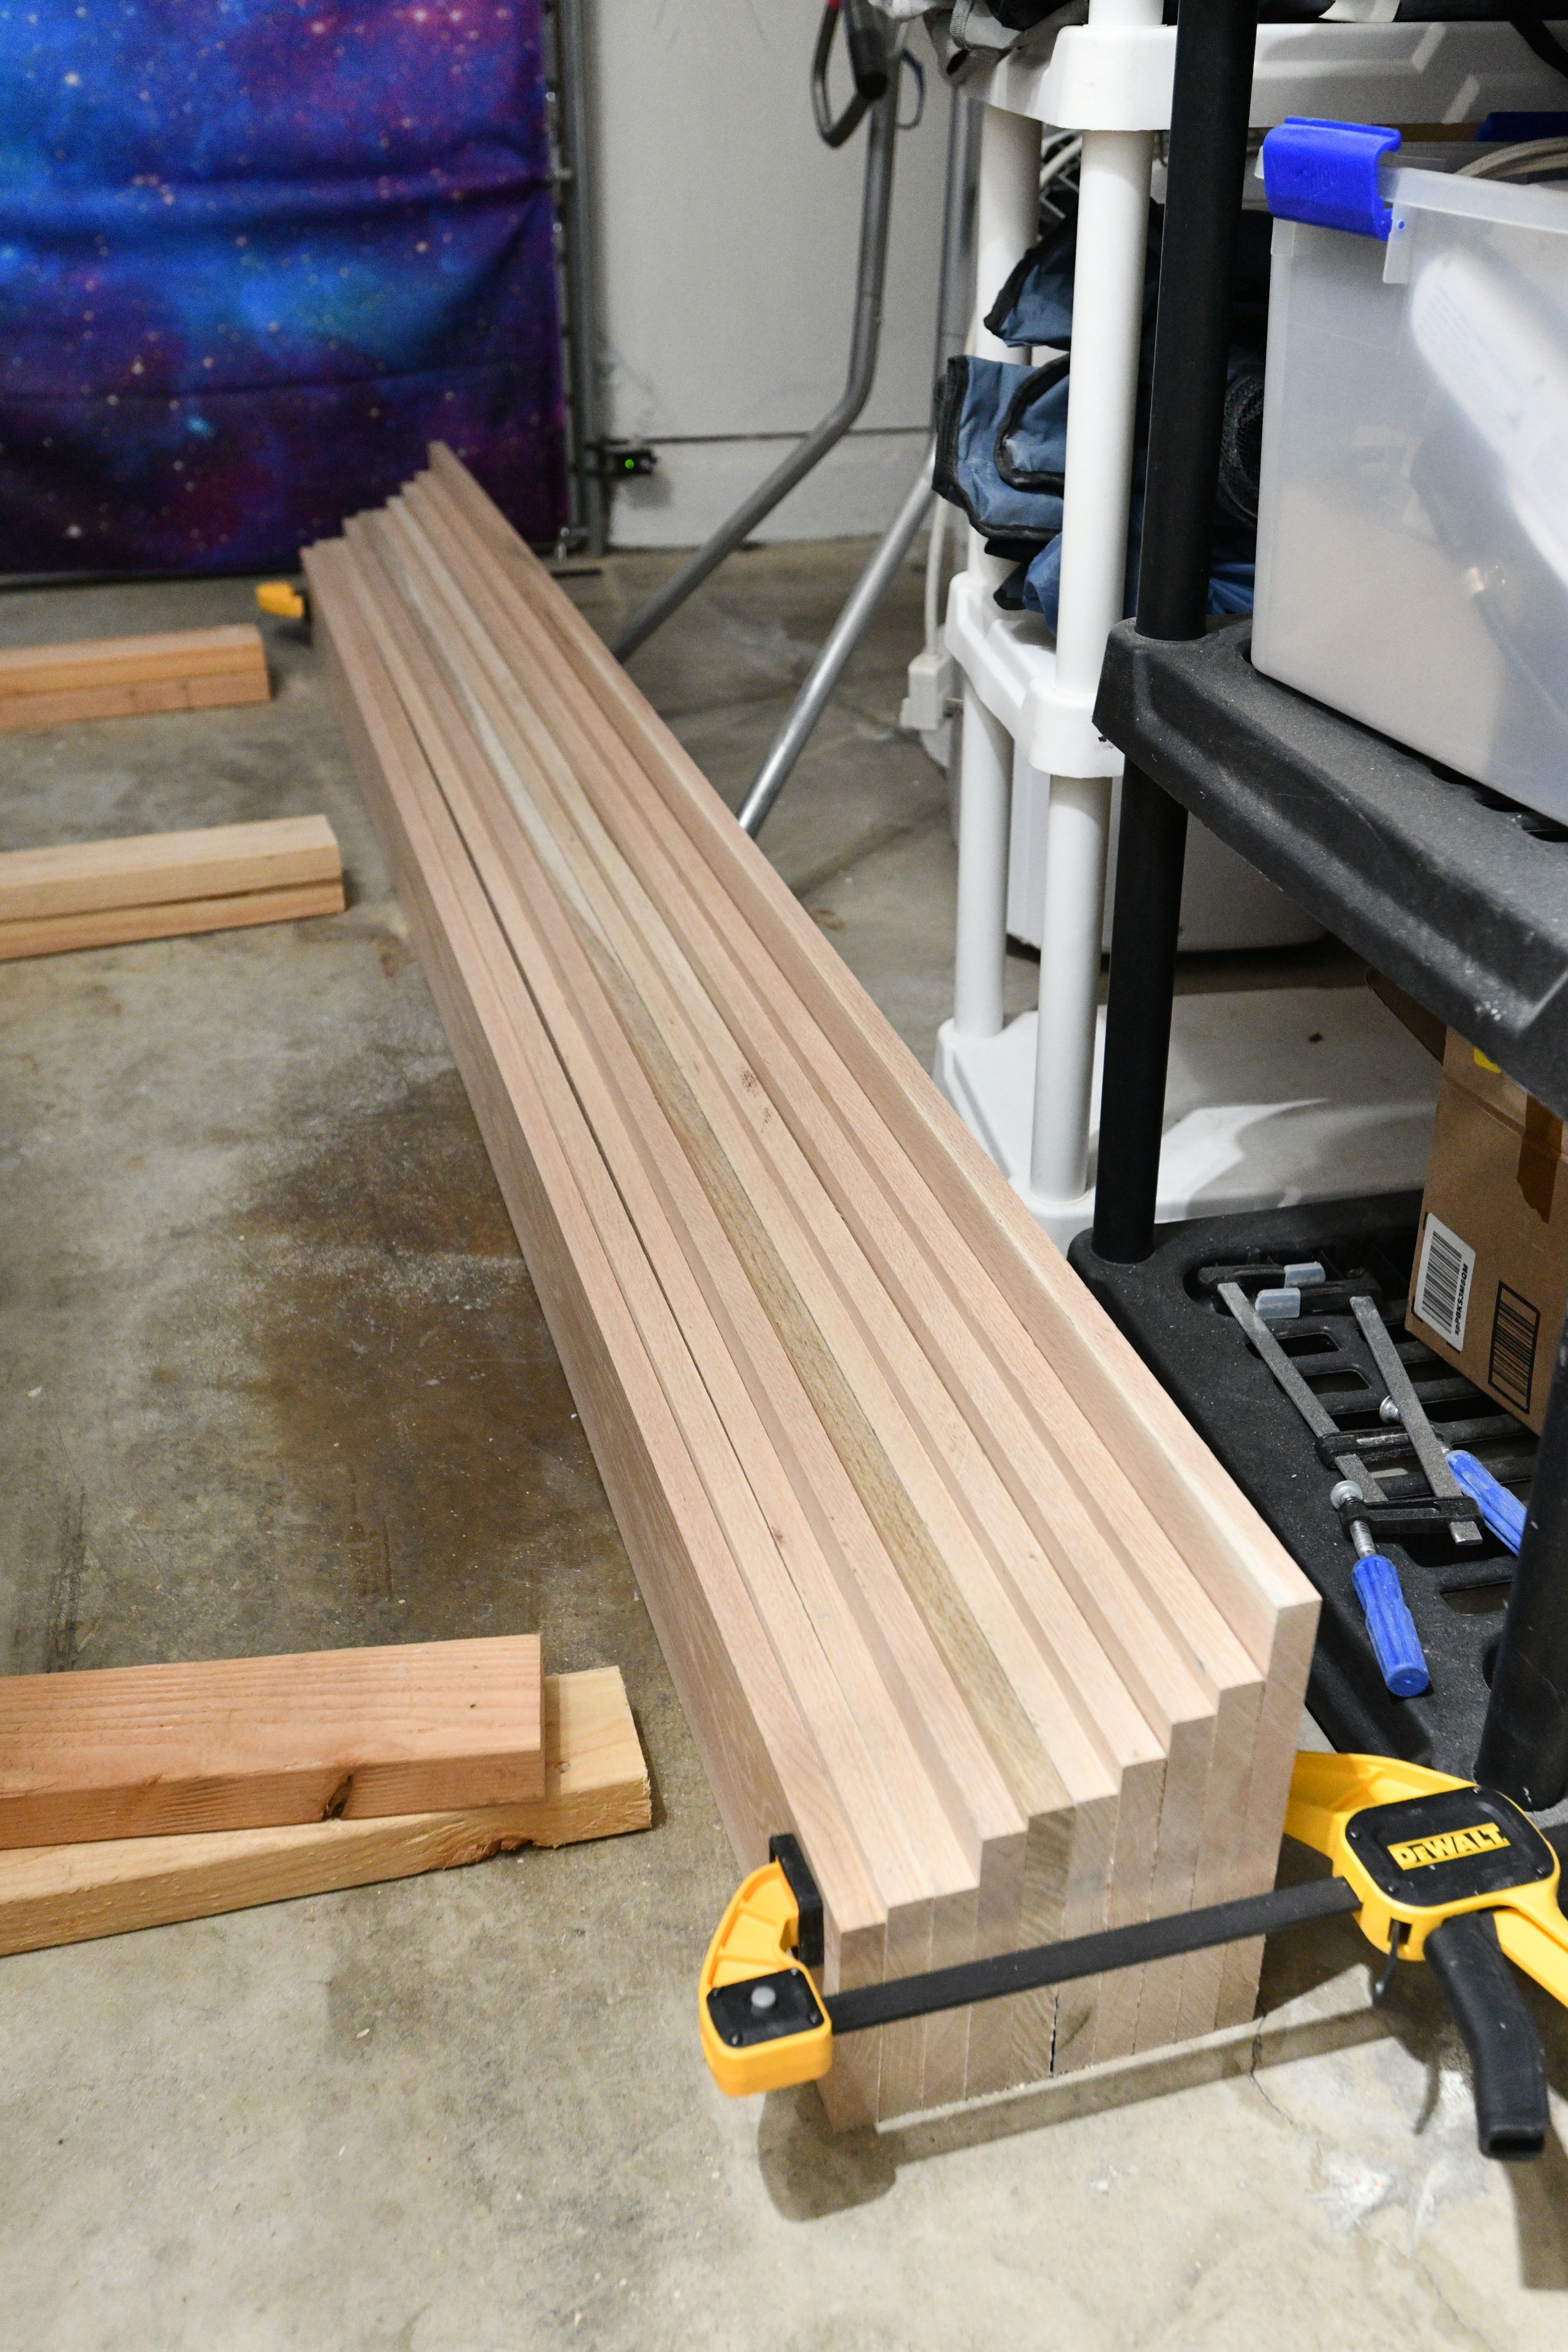 This is the pile of what will become the slats under the mattress. I wanted to preserve as much wood as possible for these, hence the seemingly random widths.